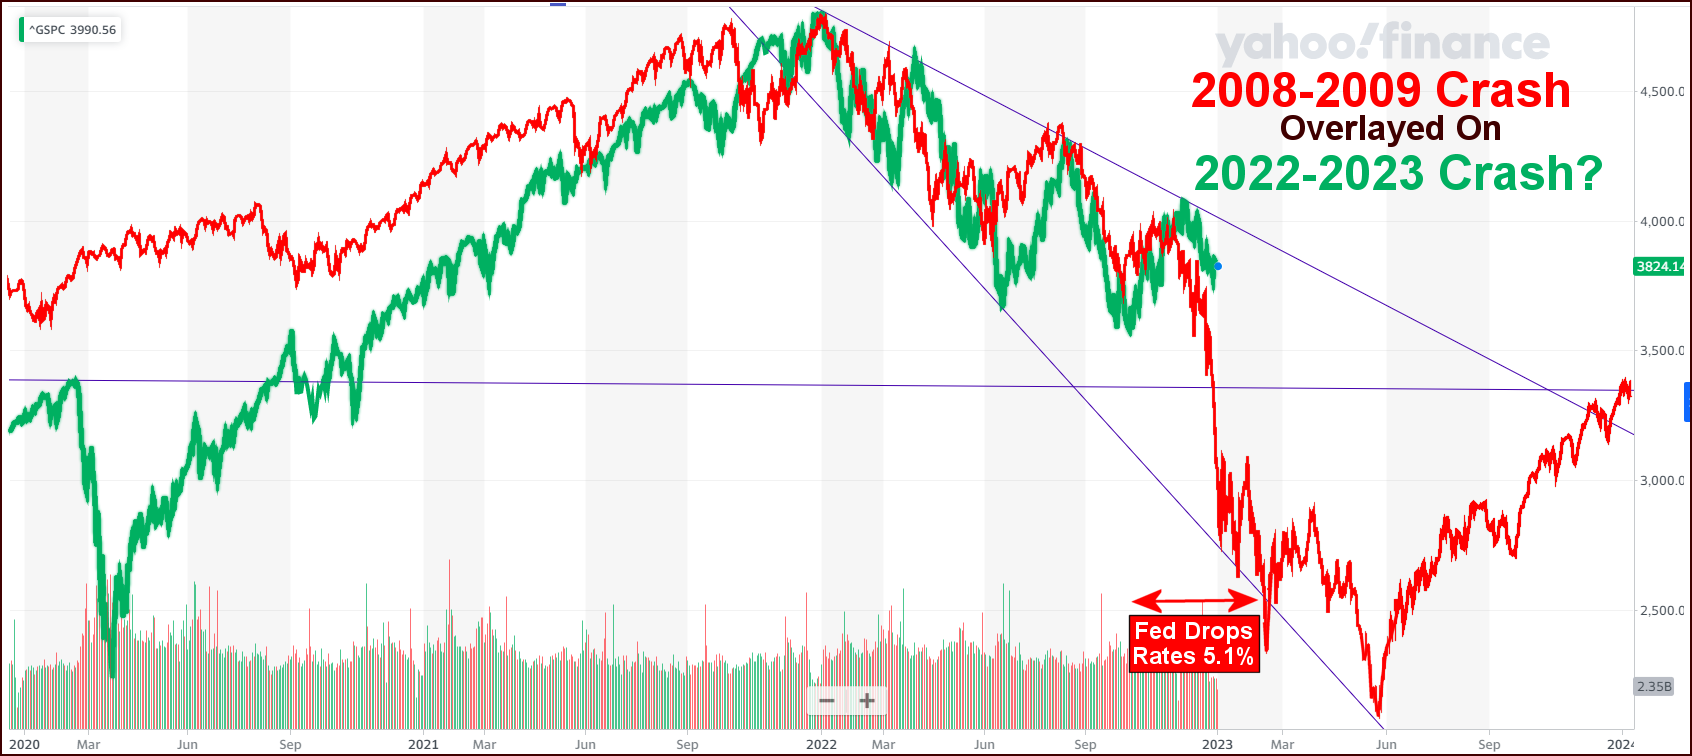 Data graph from Yahoo! finance. It shows the 2008-2009 crash overlayed on the 2022 market graph. Because the two patterns look very similar, this graph implies that there may be a sharp drop in the early months of 2023.